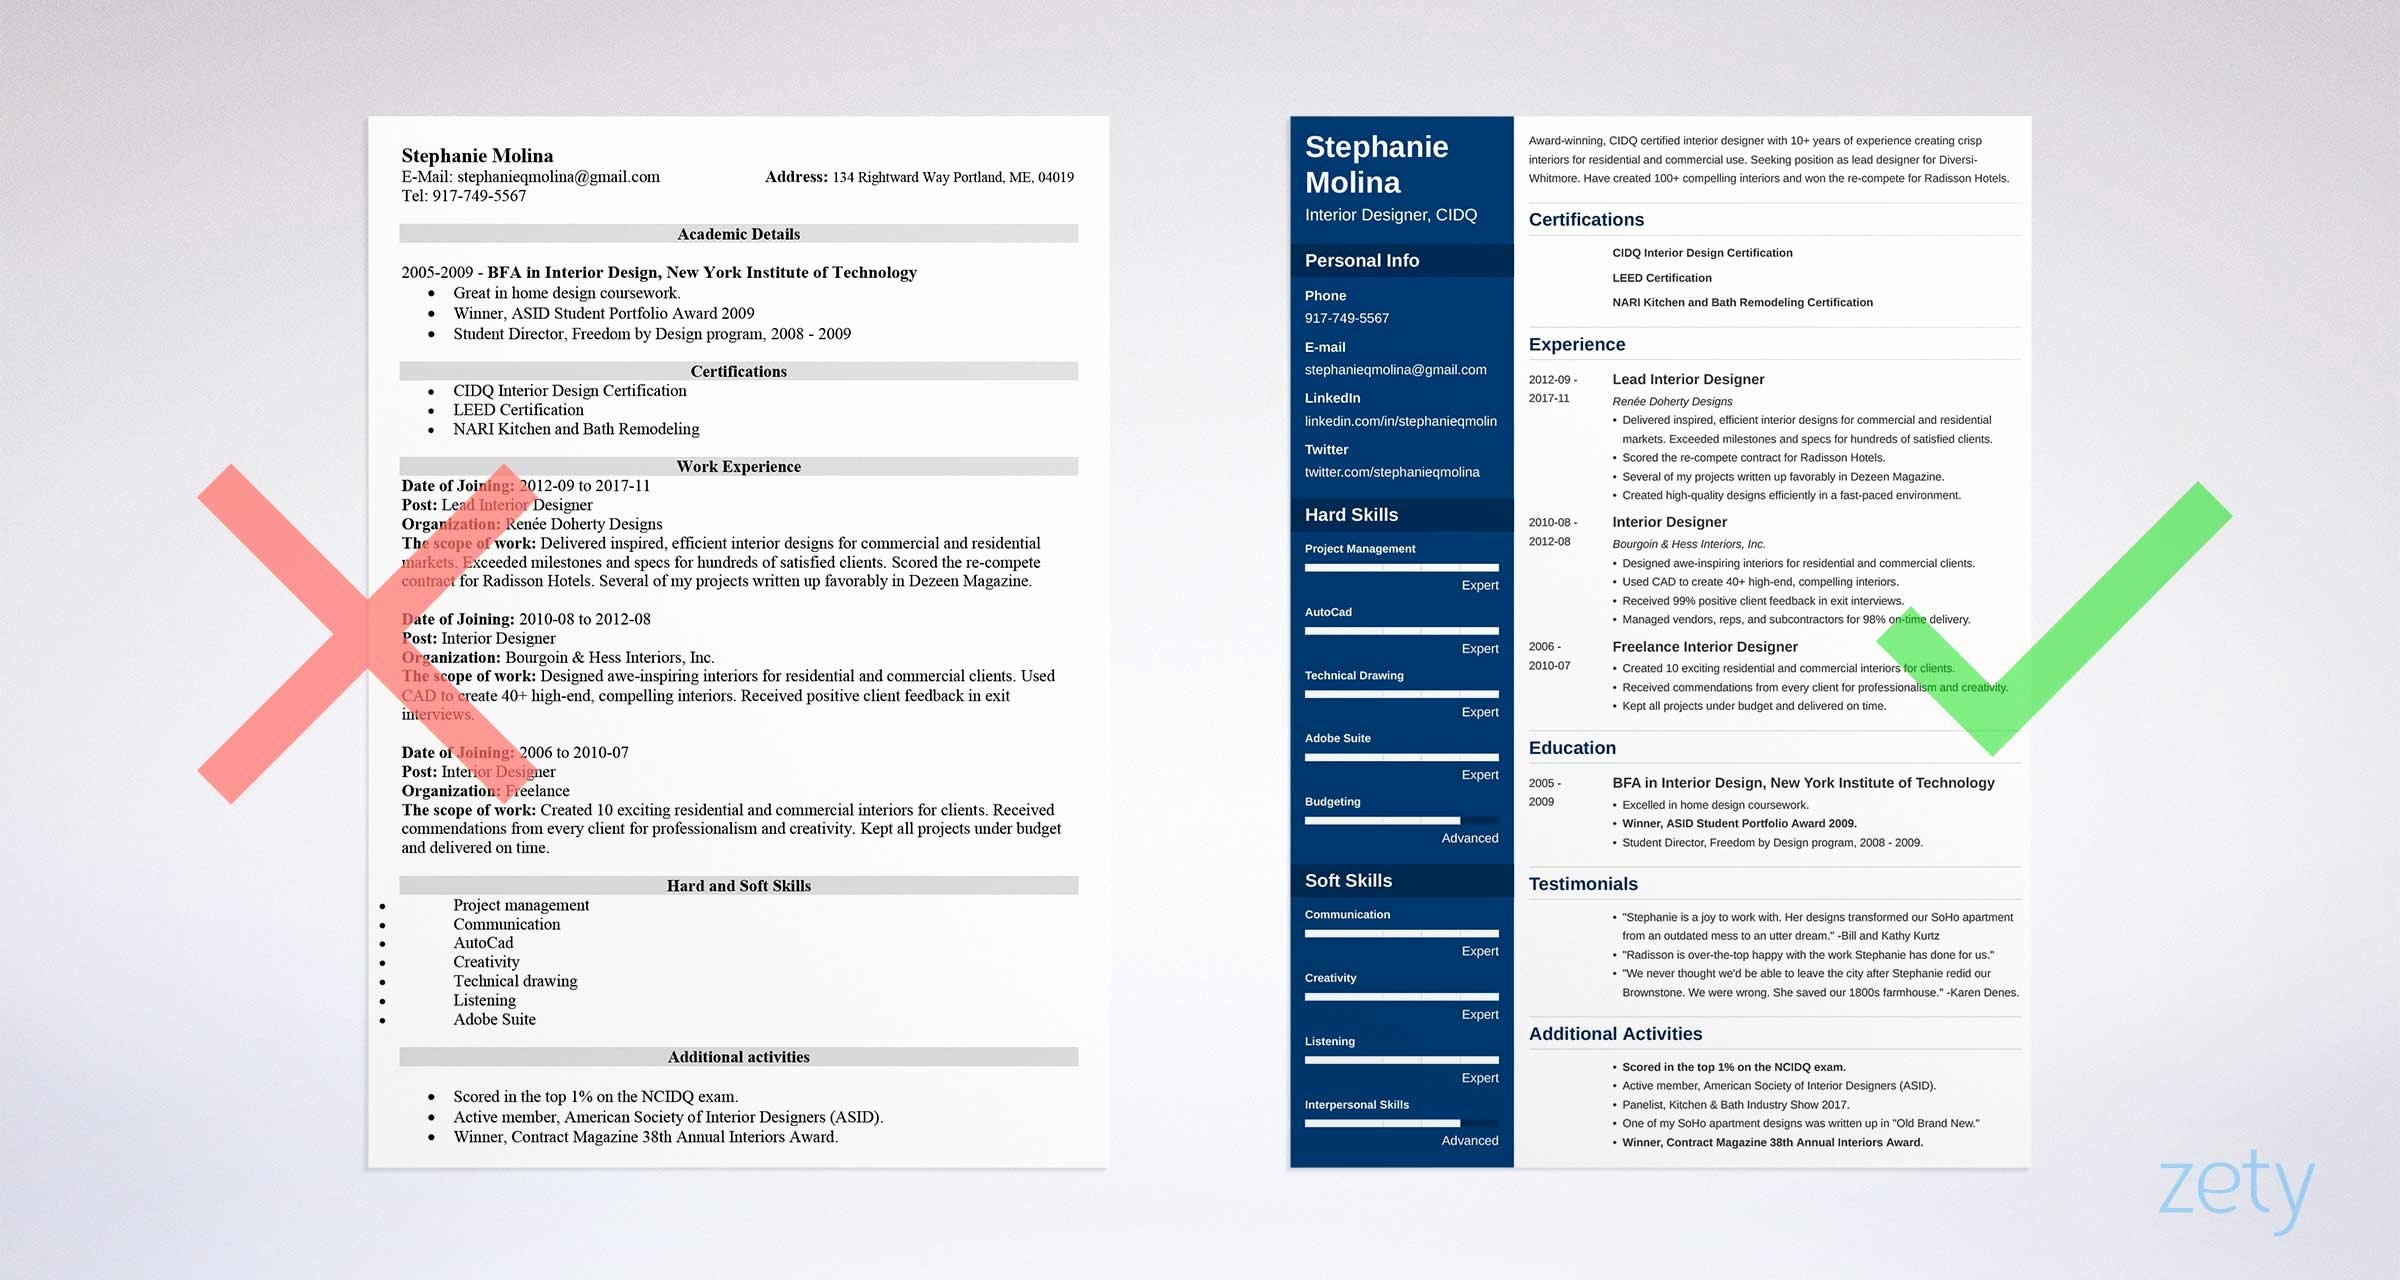 Where to Find Resume Templates Best Of Free Resume Templates 17 Downloadable Resume Templates to Use